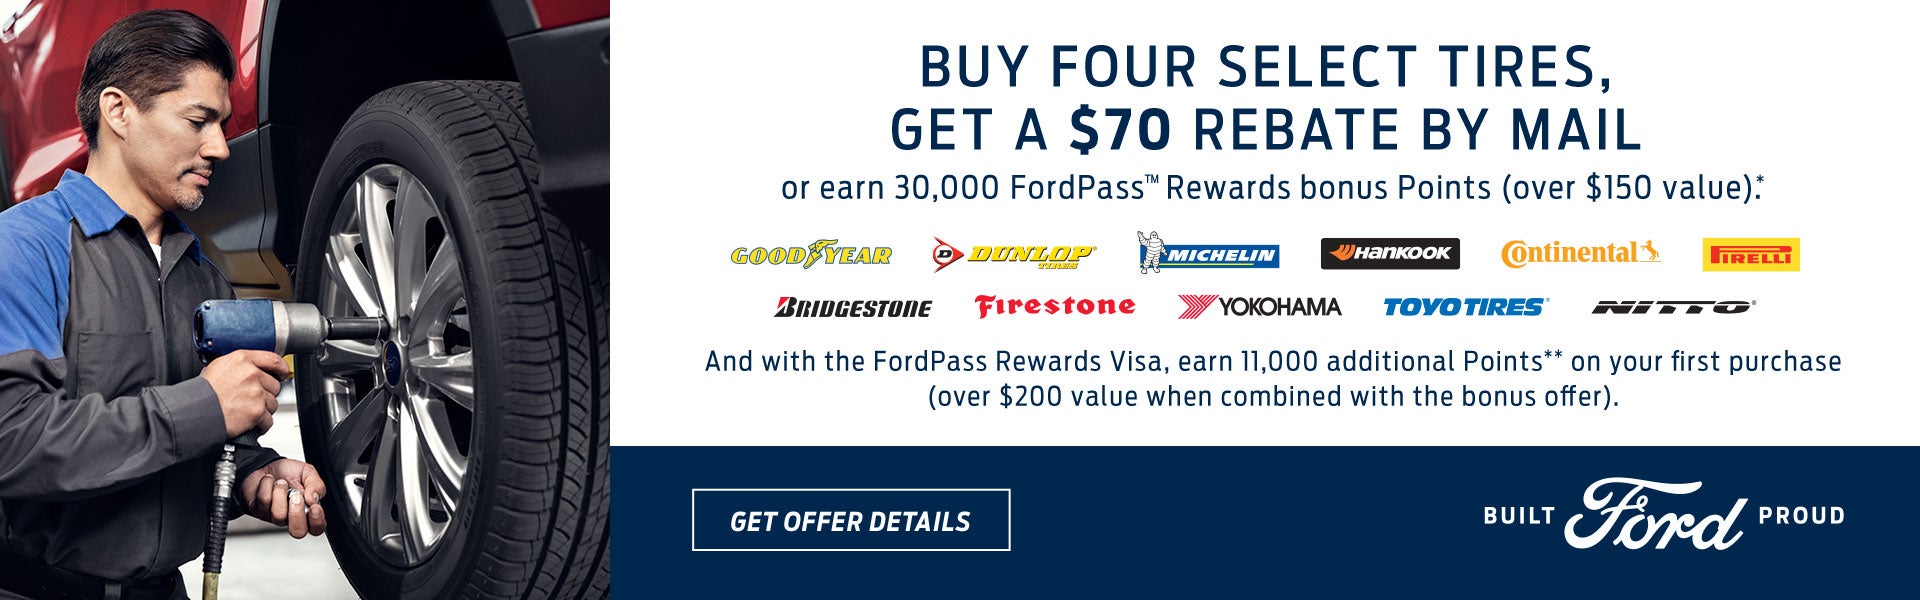 ?	Get a $70 rebate by mail or earn 30,000 FordPass™ Rewards bonus Points on 4 Tires CC Offer 